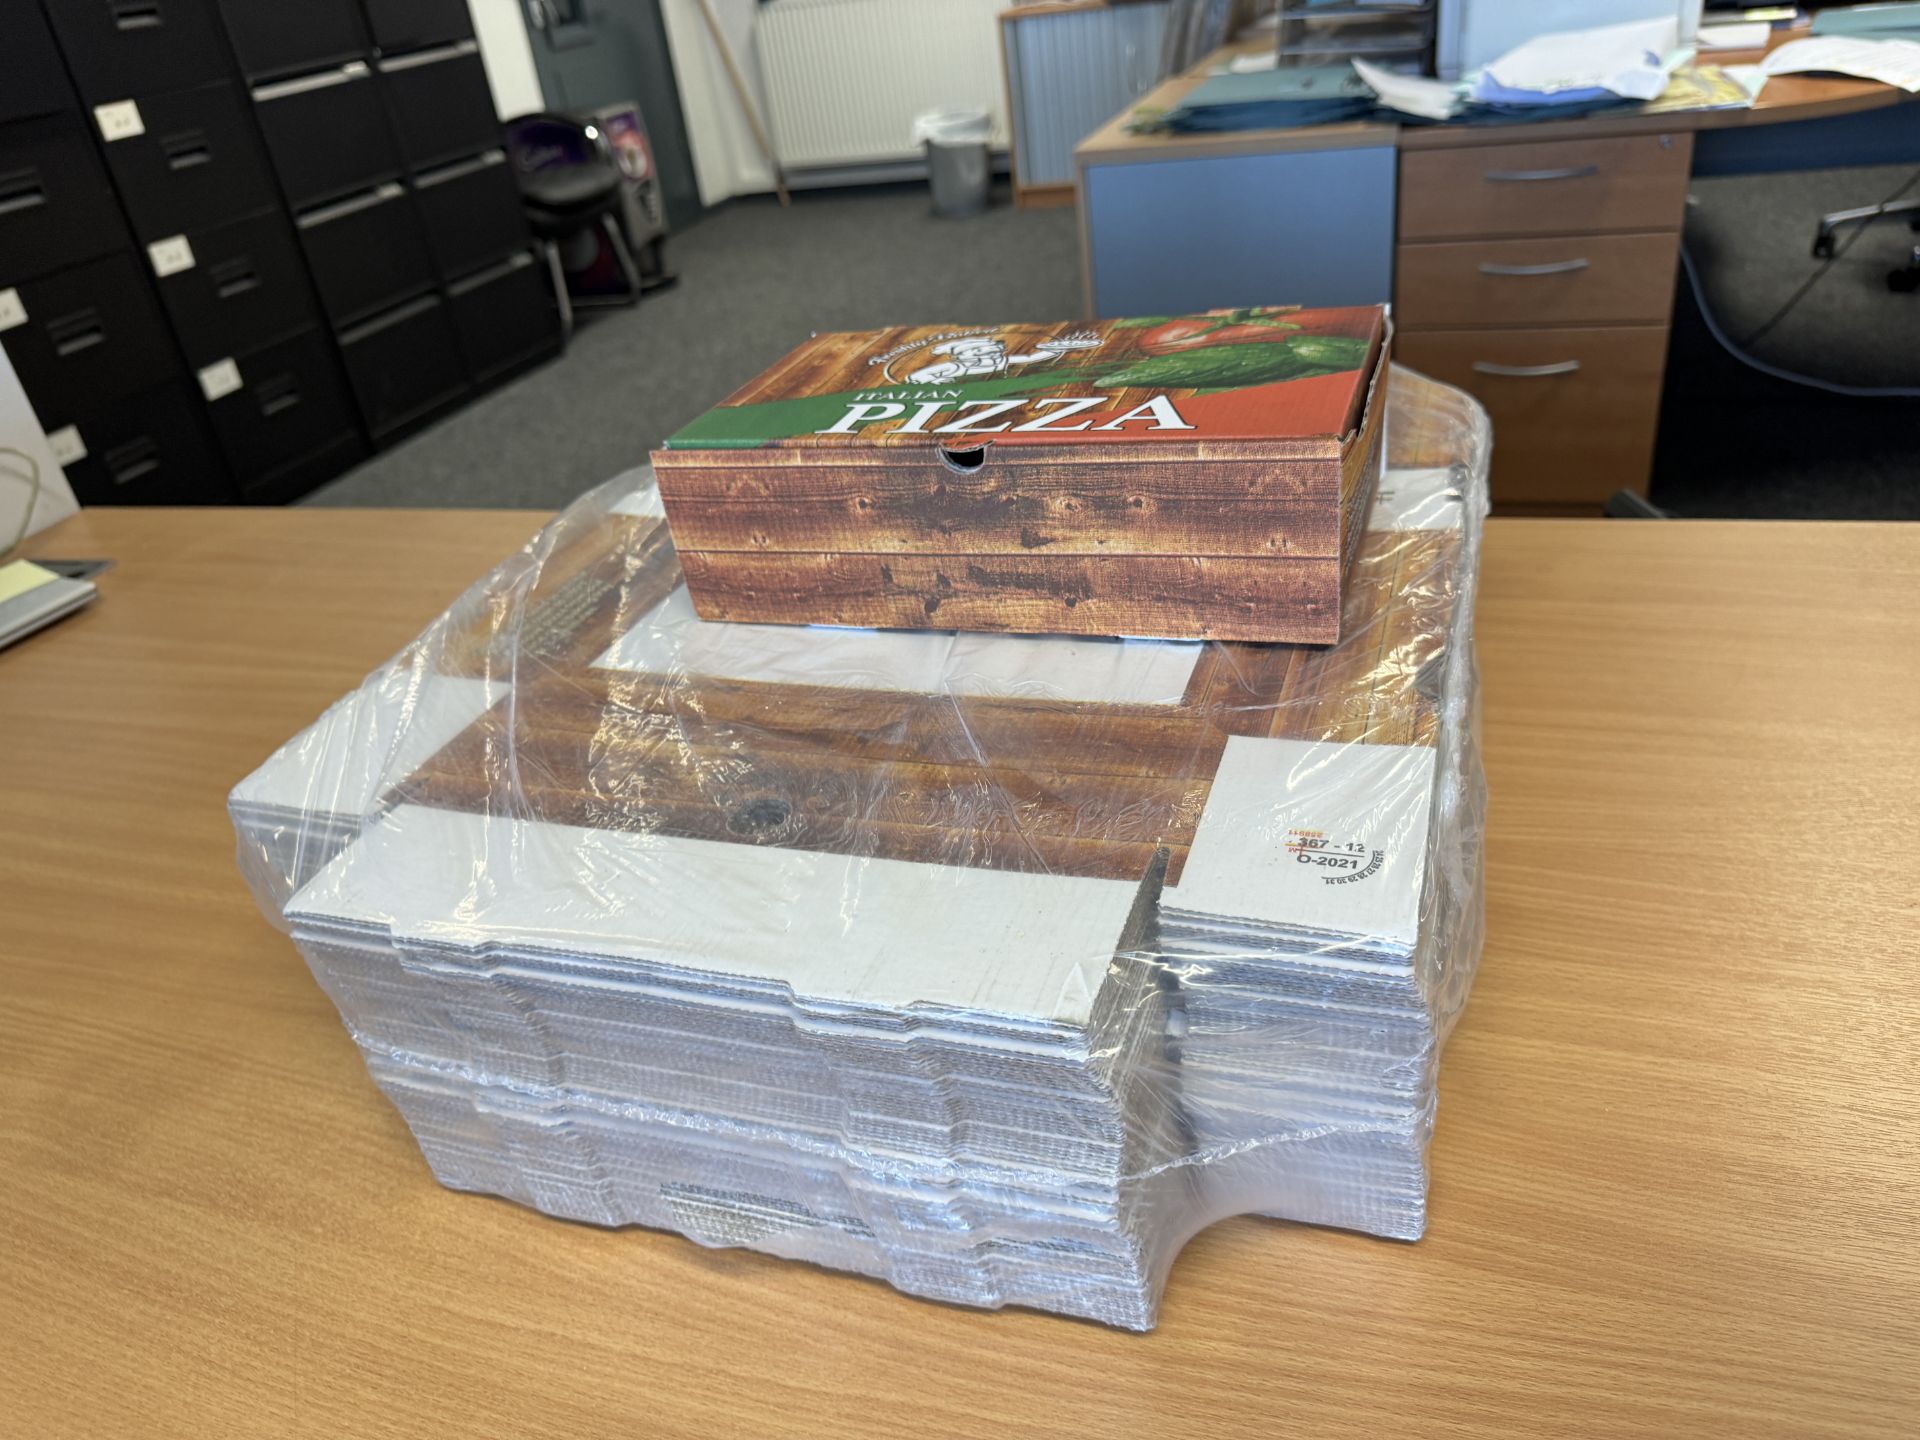 Circa 900 - Italian Pizza Calzone Boxes (Cardboard) - Multiple Uses RRP £130 - Image 10 of 12